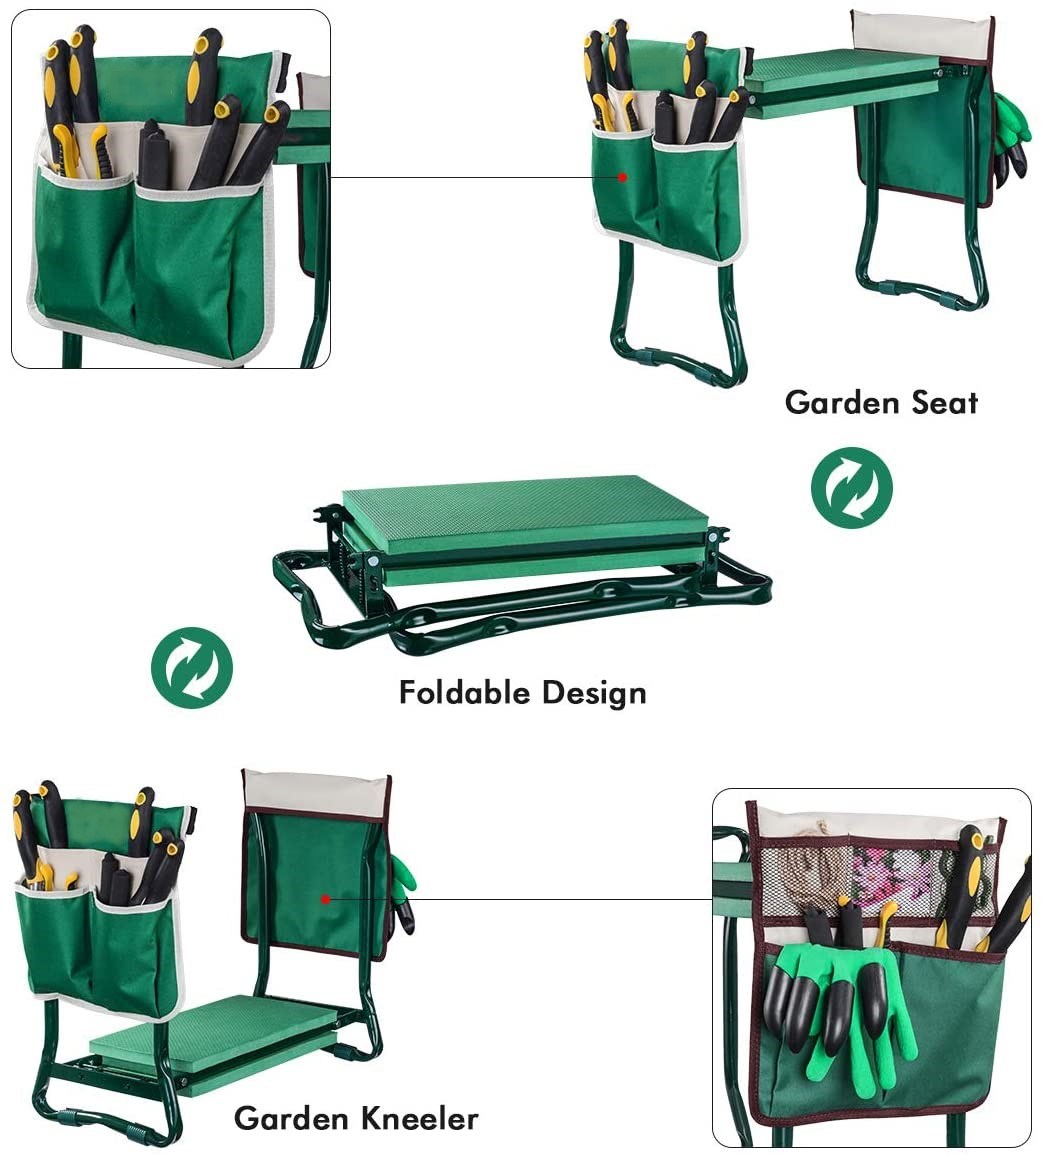 Garden Kneeler and Seat with 2 Bonus Tool Pouches - Portable Garden Bench EVA Foam Pad with Kneeling Pad for Gardening - Sturdy, Lightweight and Practical - Protect Knees and Clothes When Gardening XH